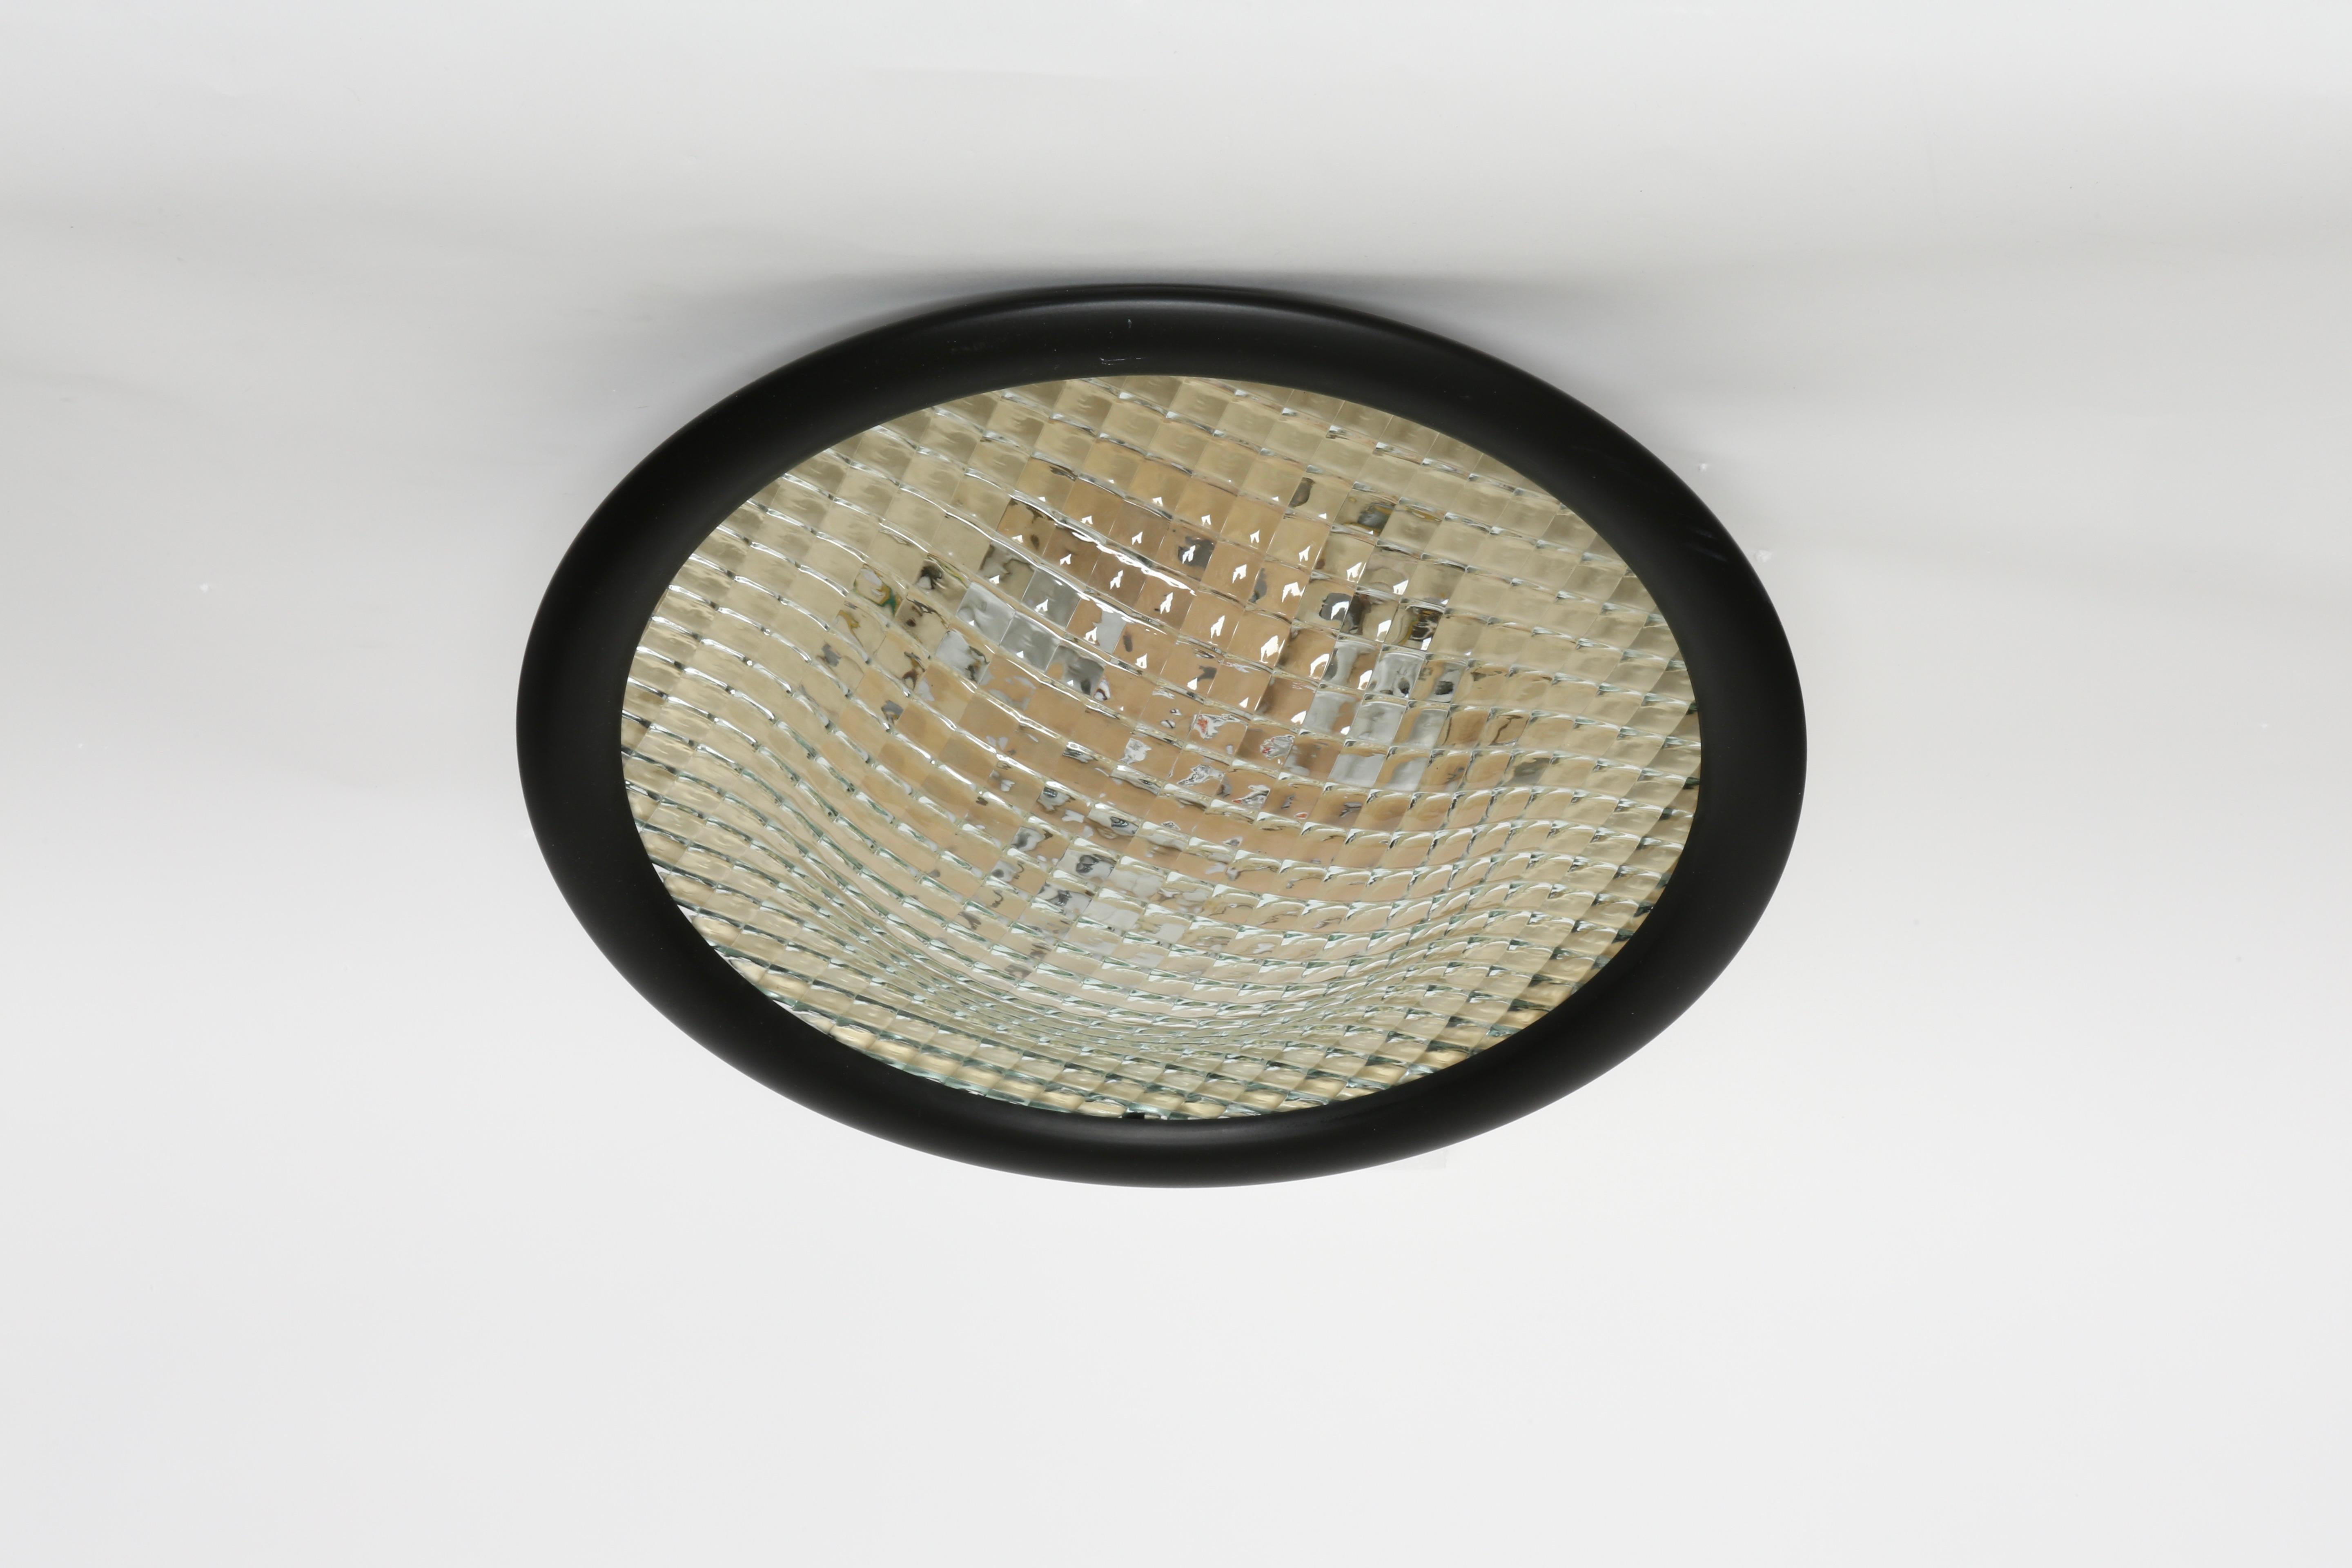 Stilnovo flush mount ceiling light, Large.
Made in Italy in 1970s.
Rare pair in large size.
Concave prismatic glass, enameled metal.
Stilnovo label.
Complimentary US rewiring upon request.
Take 3 medium base bulbs.
Price is for 1 flush mount.
3